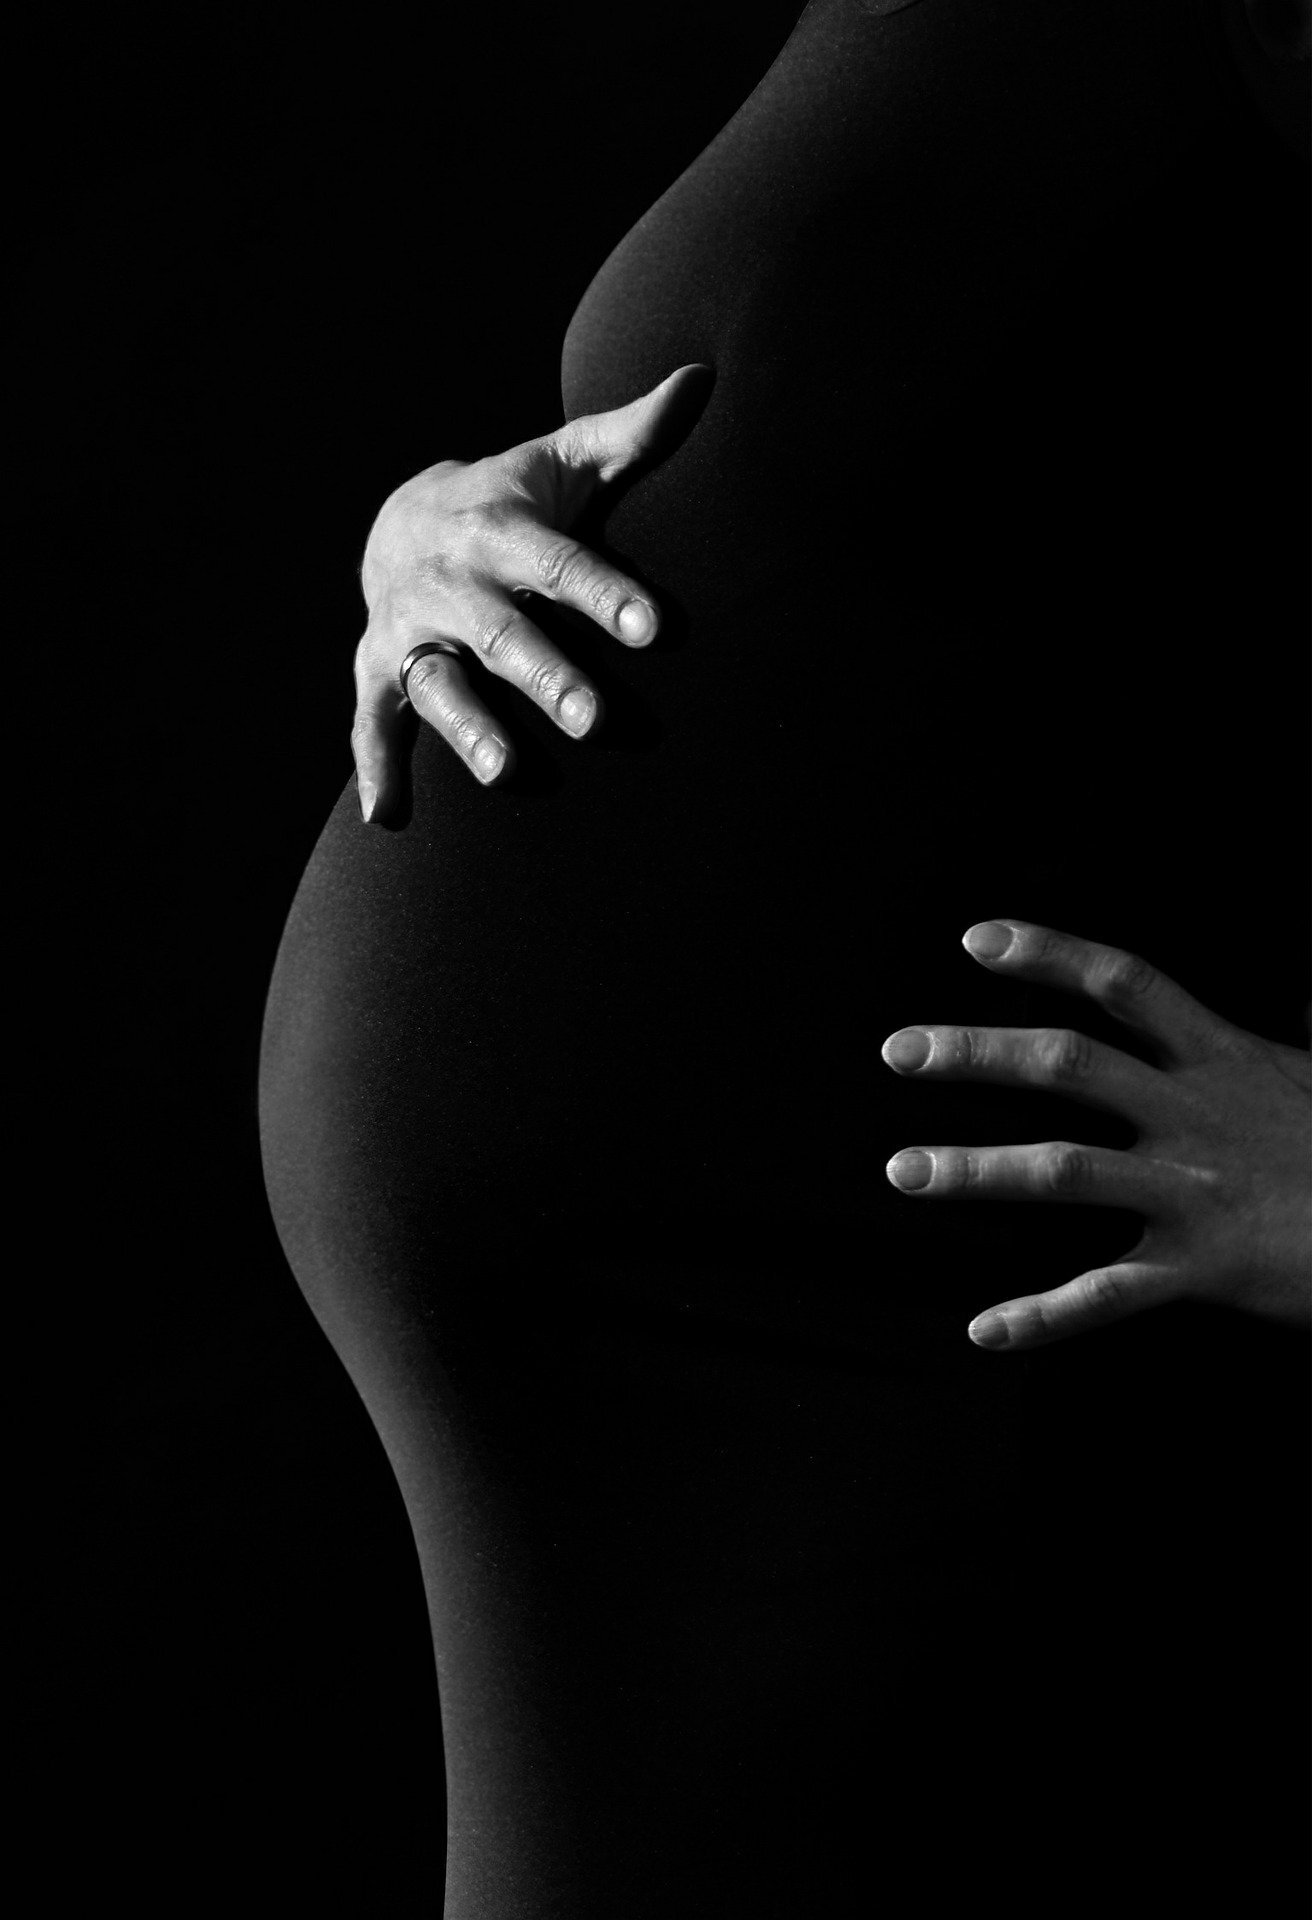 #Disinfectant use during pregnancy linked to childhood asthma and eczema